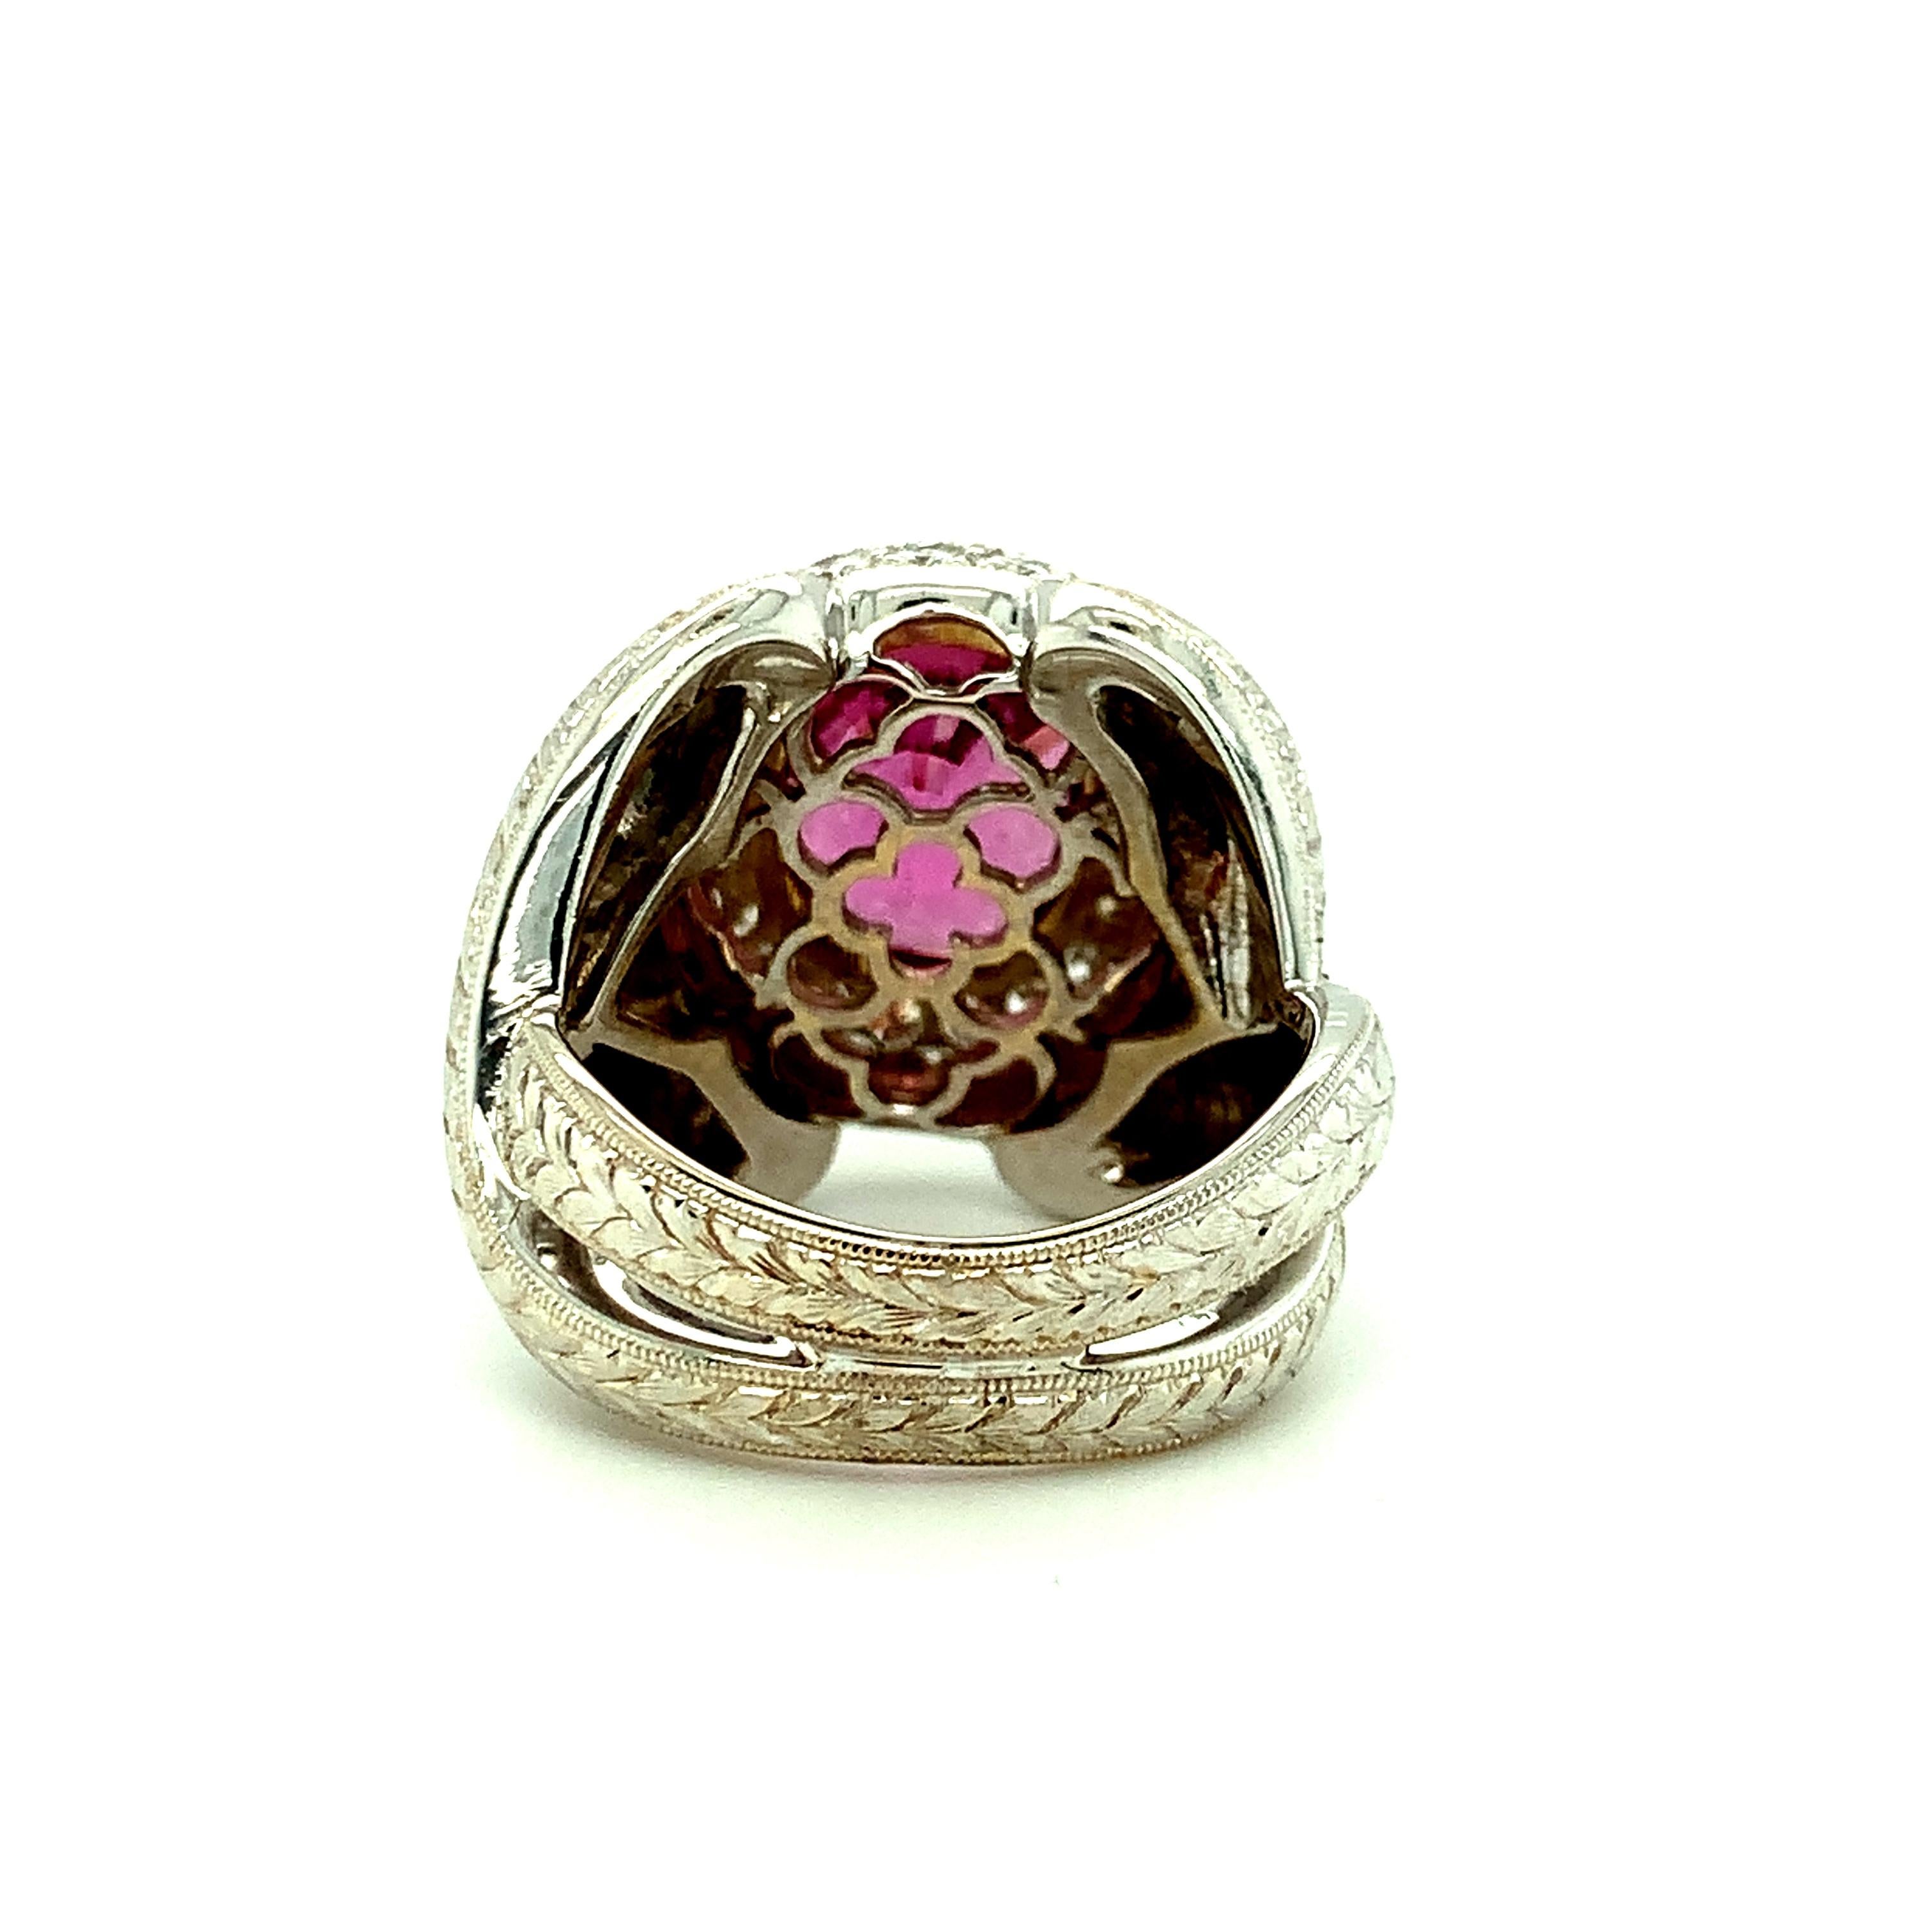 GIA Certified 7.08 Carat Pink Sapphire and Diamond Cocktail Ring in 18k Gold For Sale 2